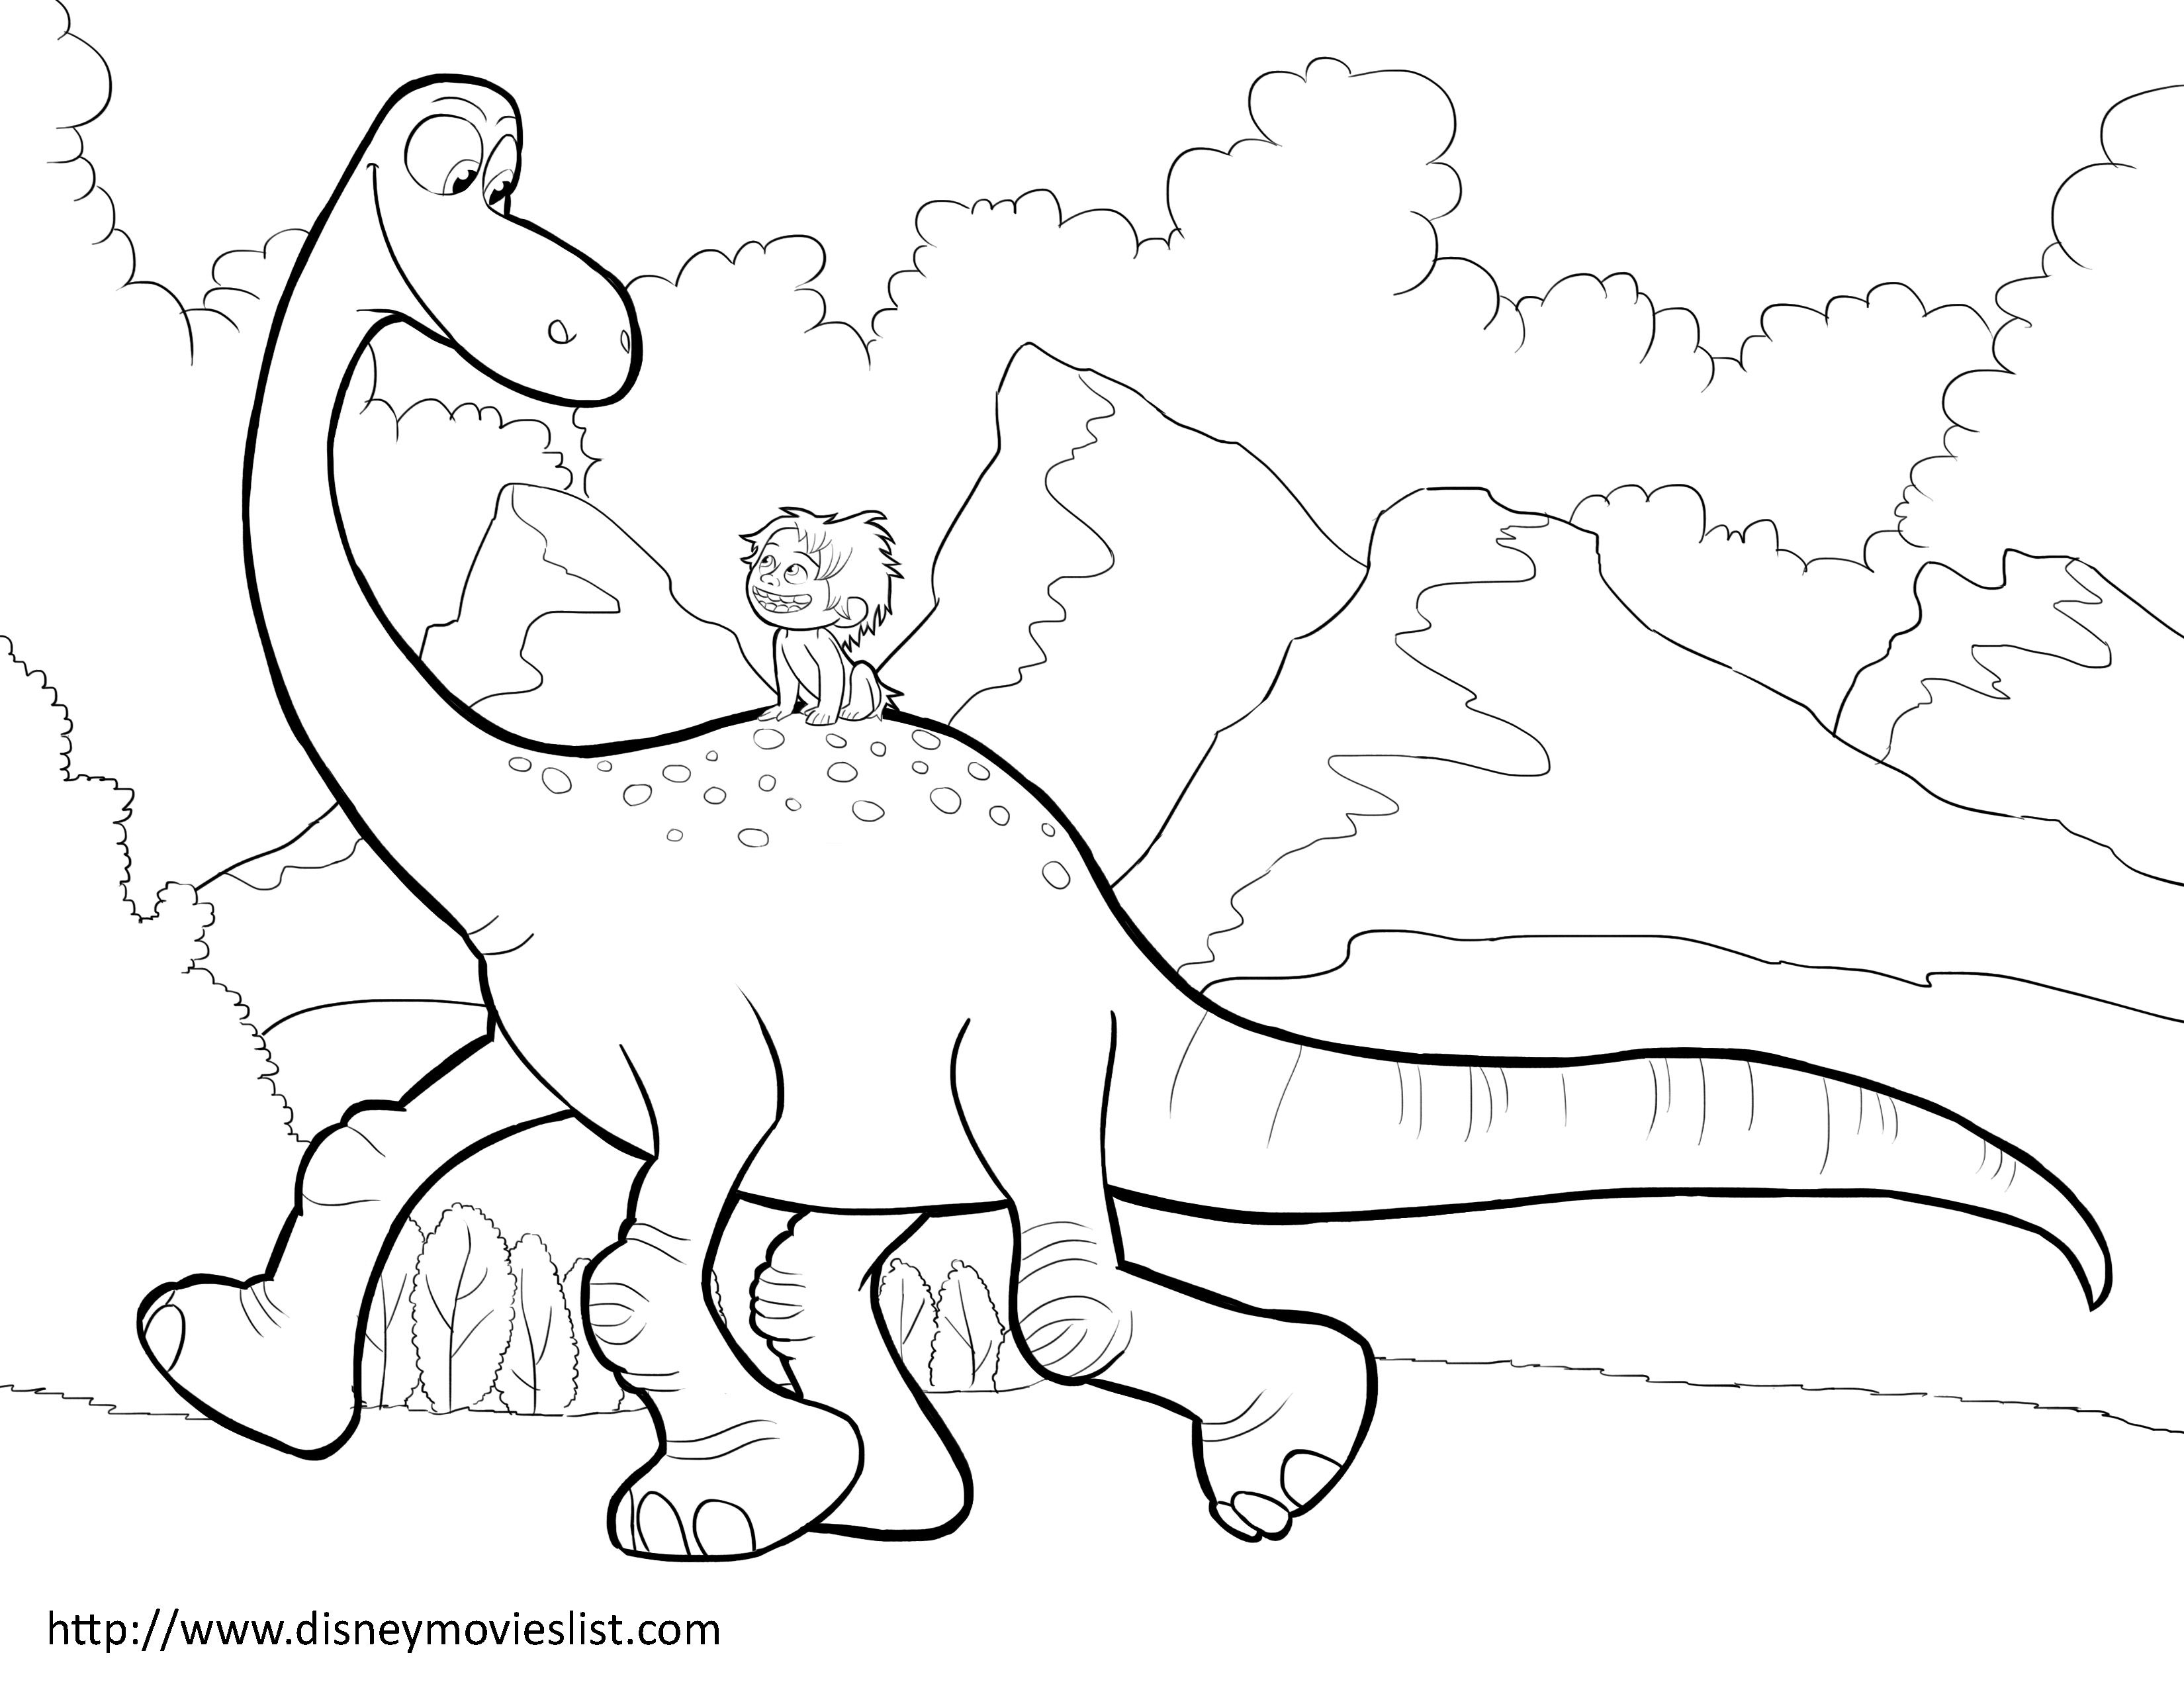 Coloring pages, Dinosaurs and Coloring